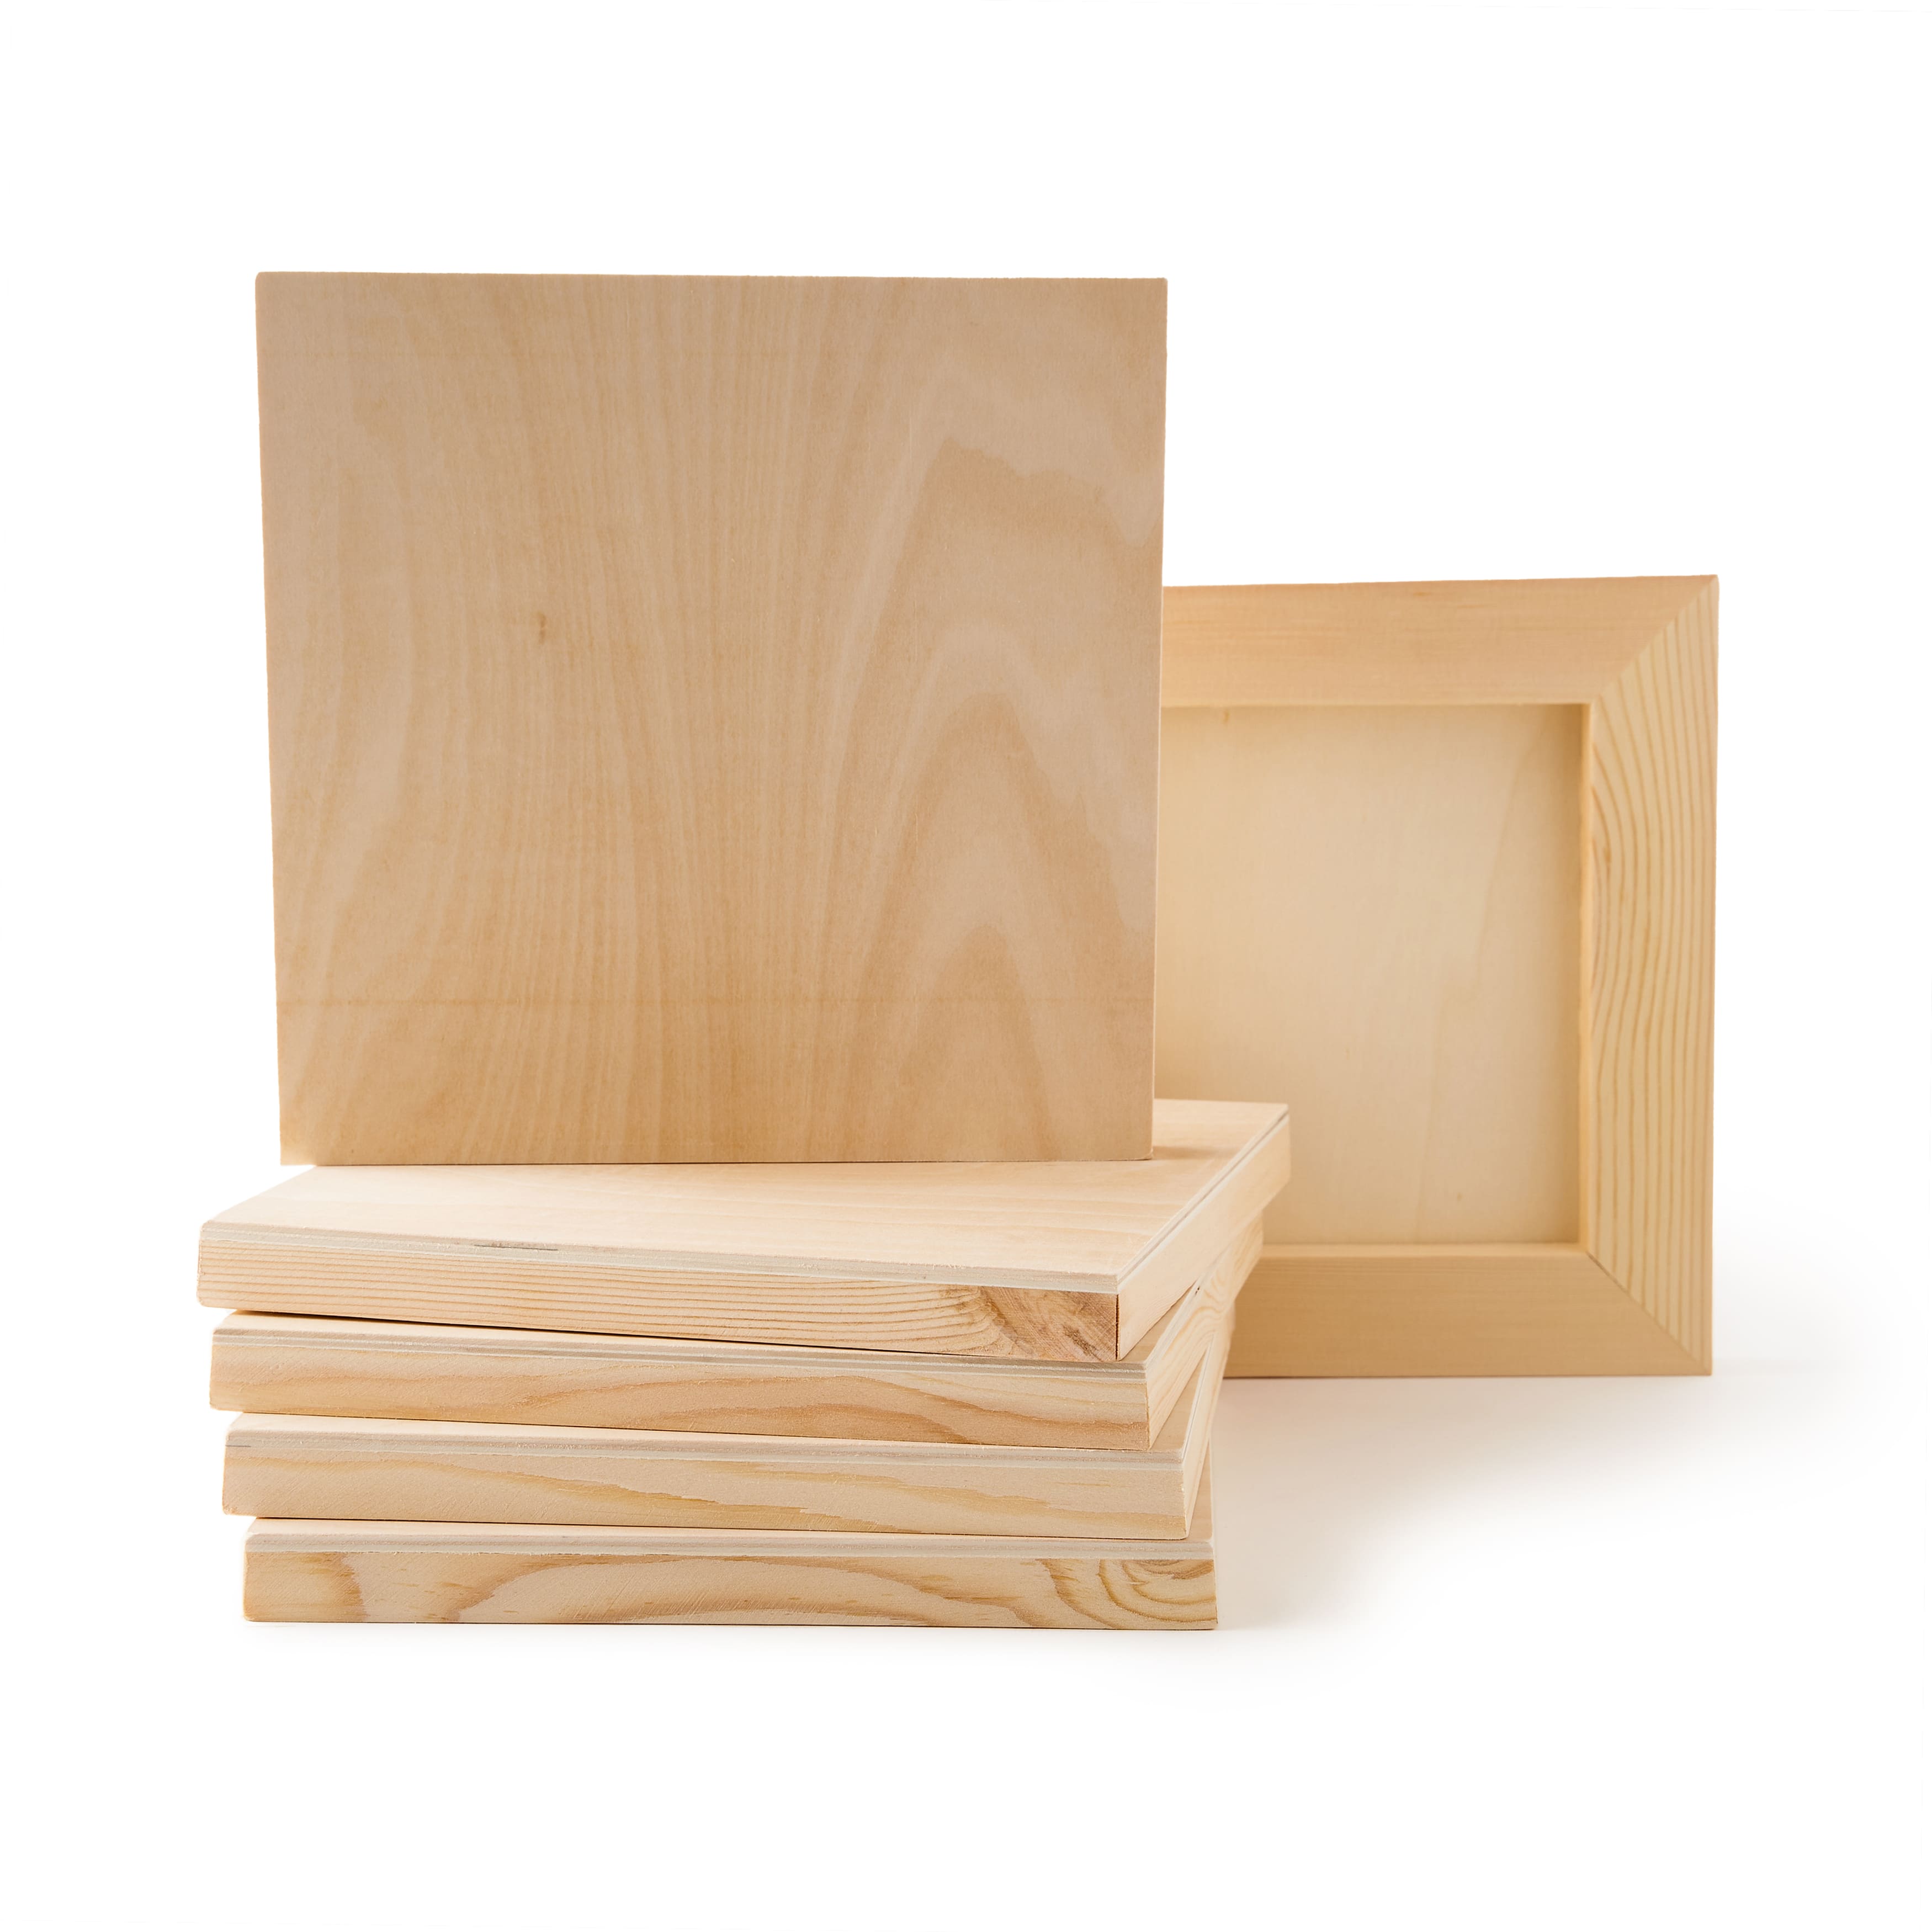 Unfinished Wood Canvas Boards for Painting 10 X 10 in 6 Pack for sale  online